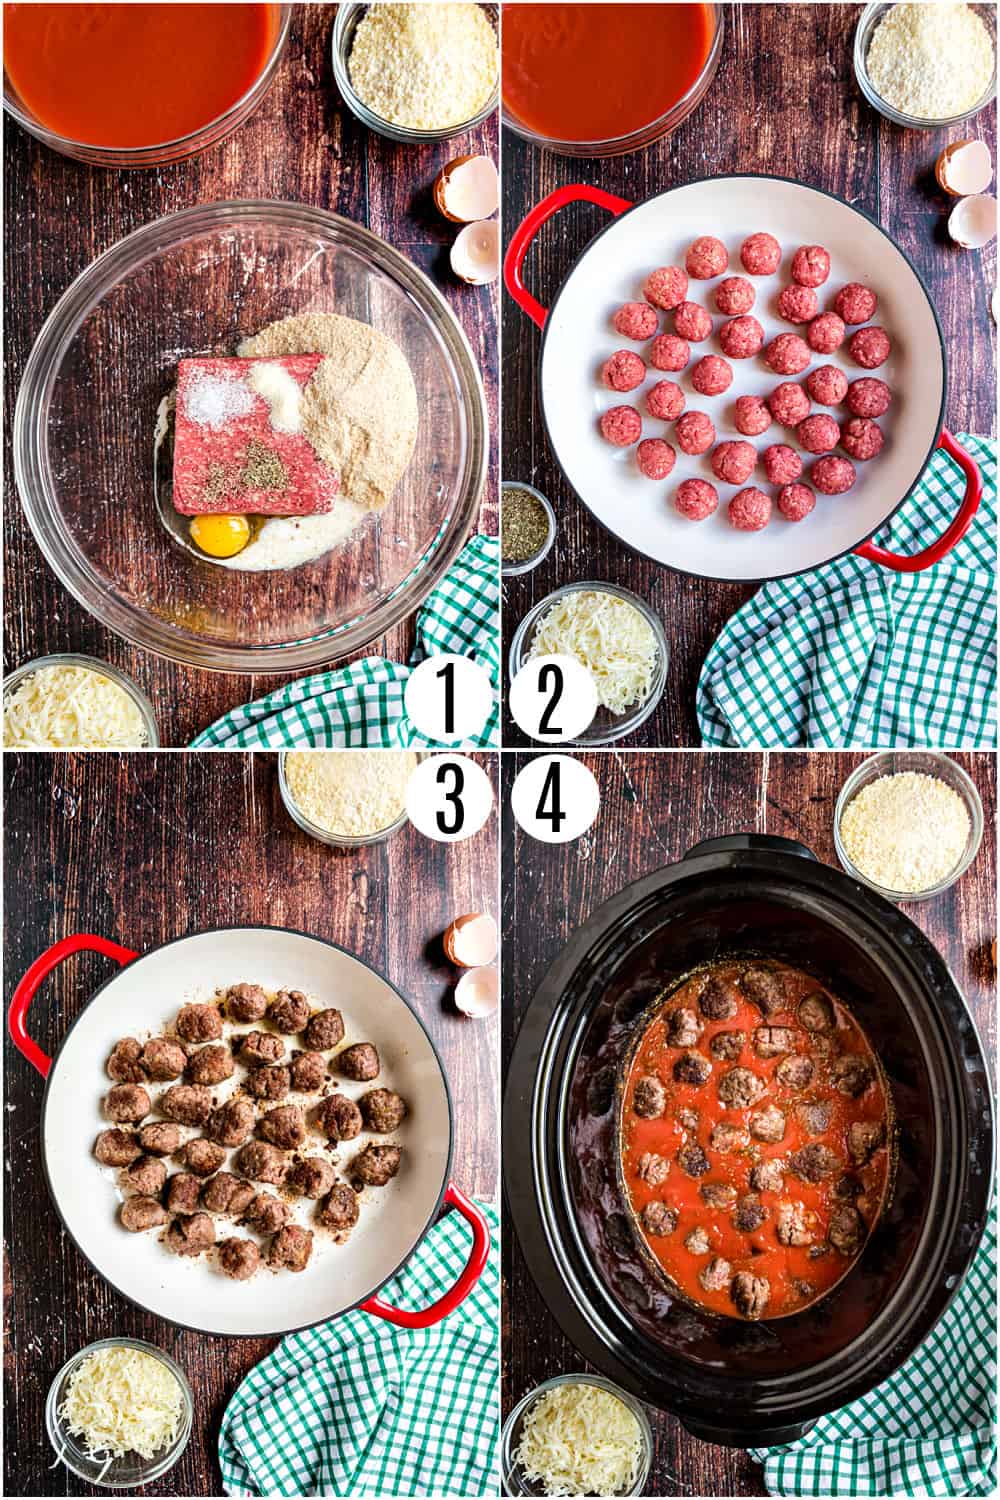 Step by step photos showing how to make meatballs in skillet.